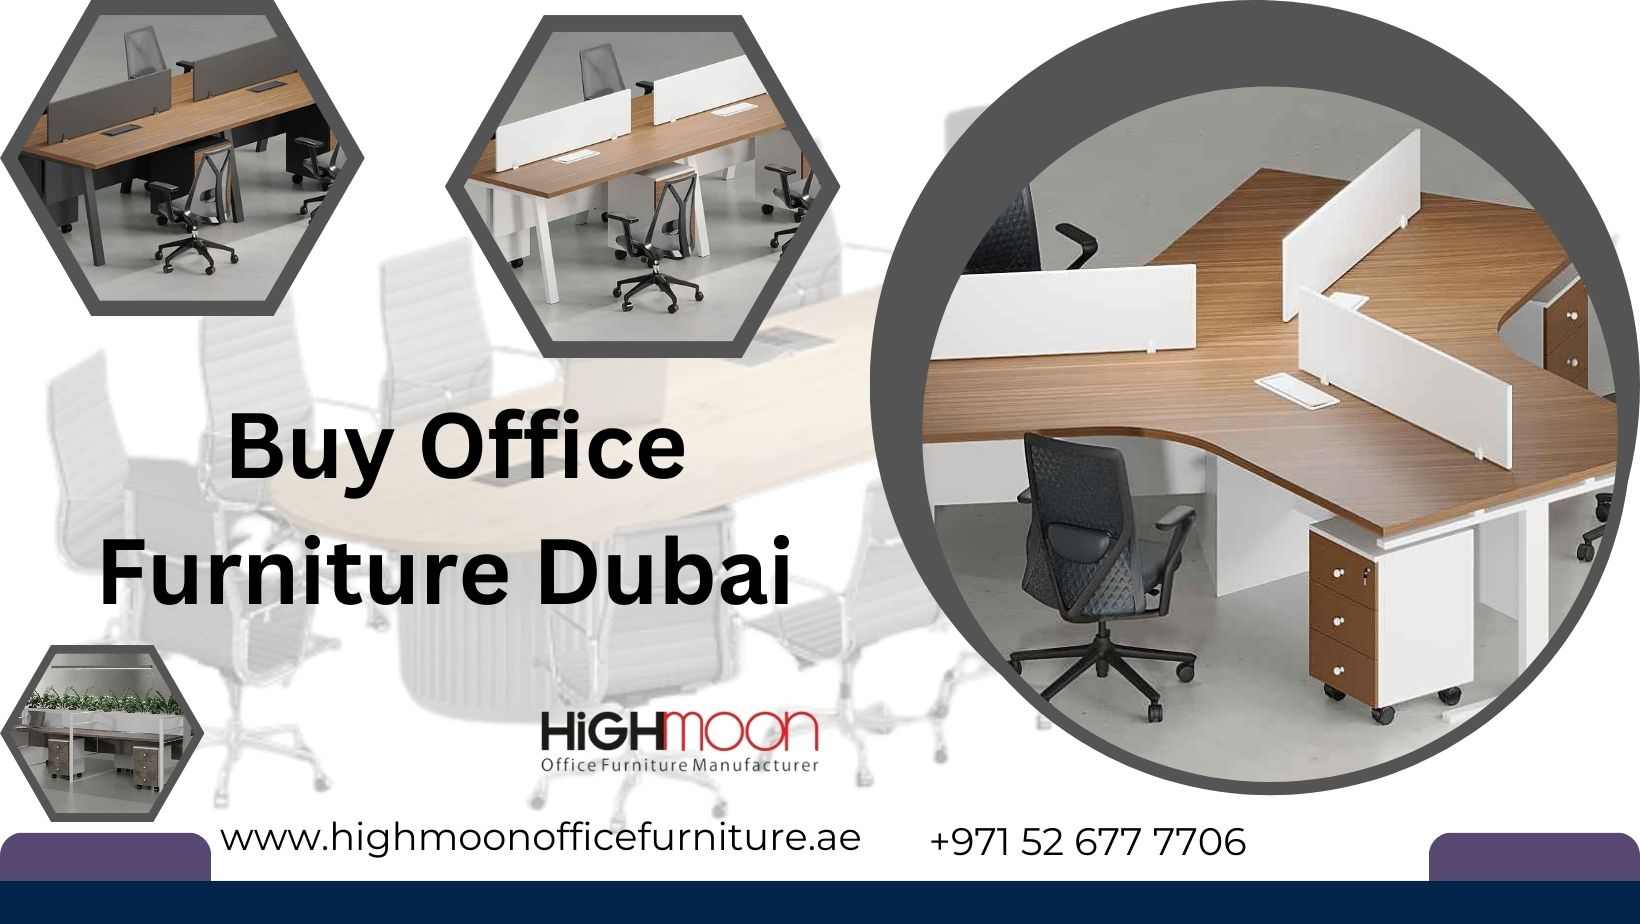 Guide How to Buy Office Furniture in Dubai | Highmoon Office Furn